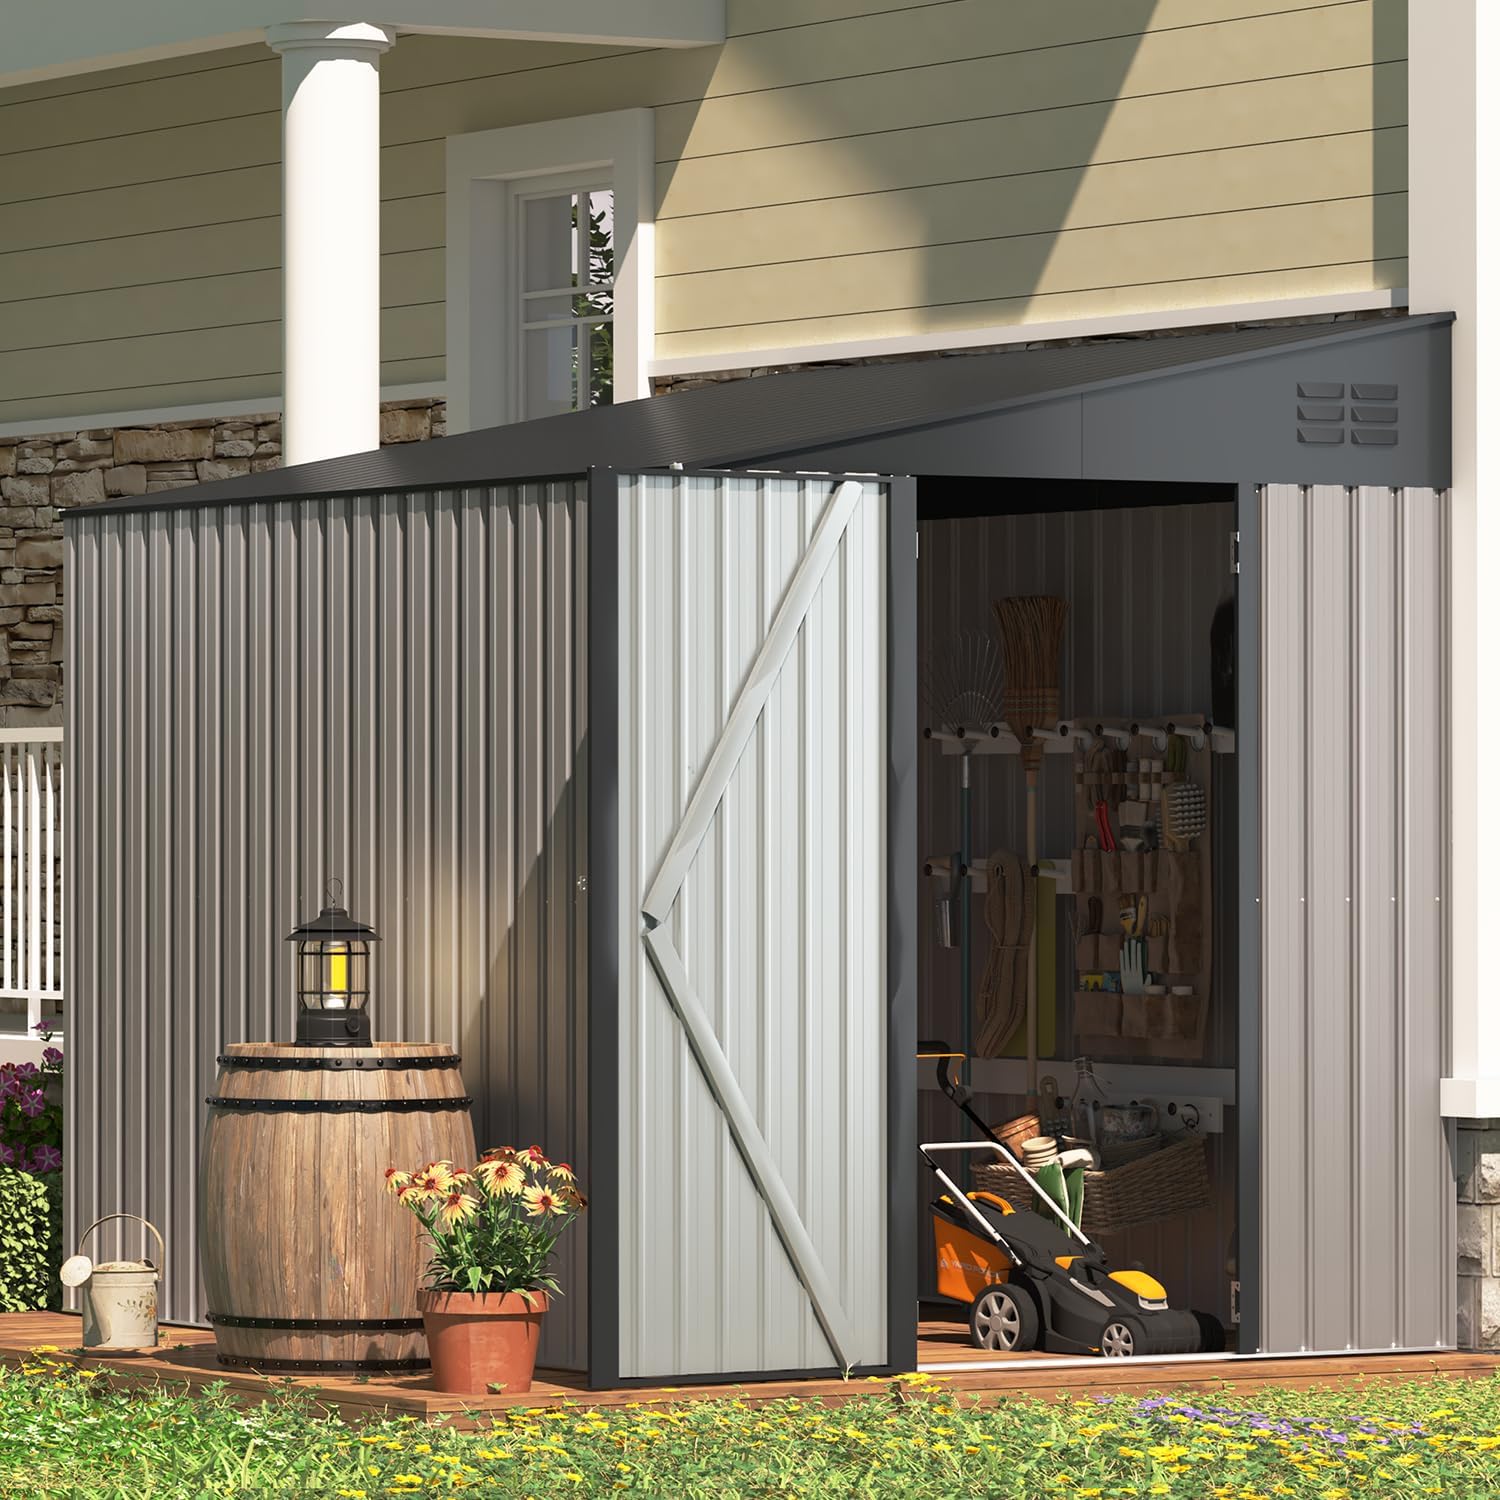 

Shed Lean To Storage Shed, Outdoor 6' X 8' Metal Wall Side Storage Sheds & Outdoor Storage, Garden Storage Cabinet For Backayrd, Patio And Outdoor Use In Grey